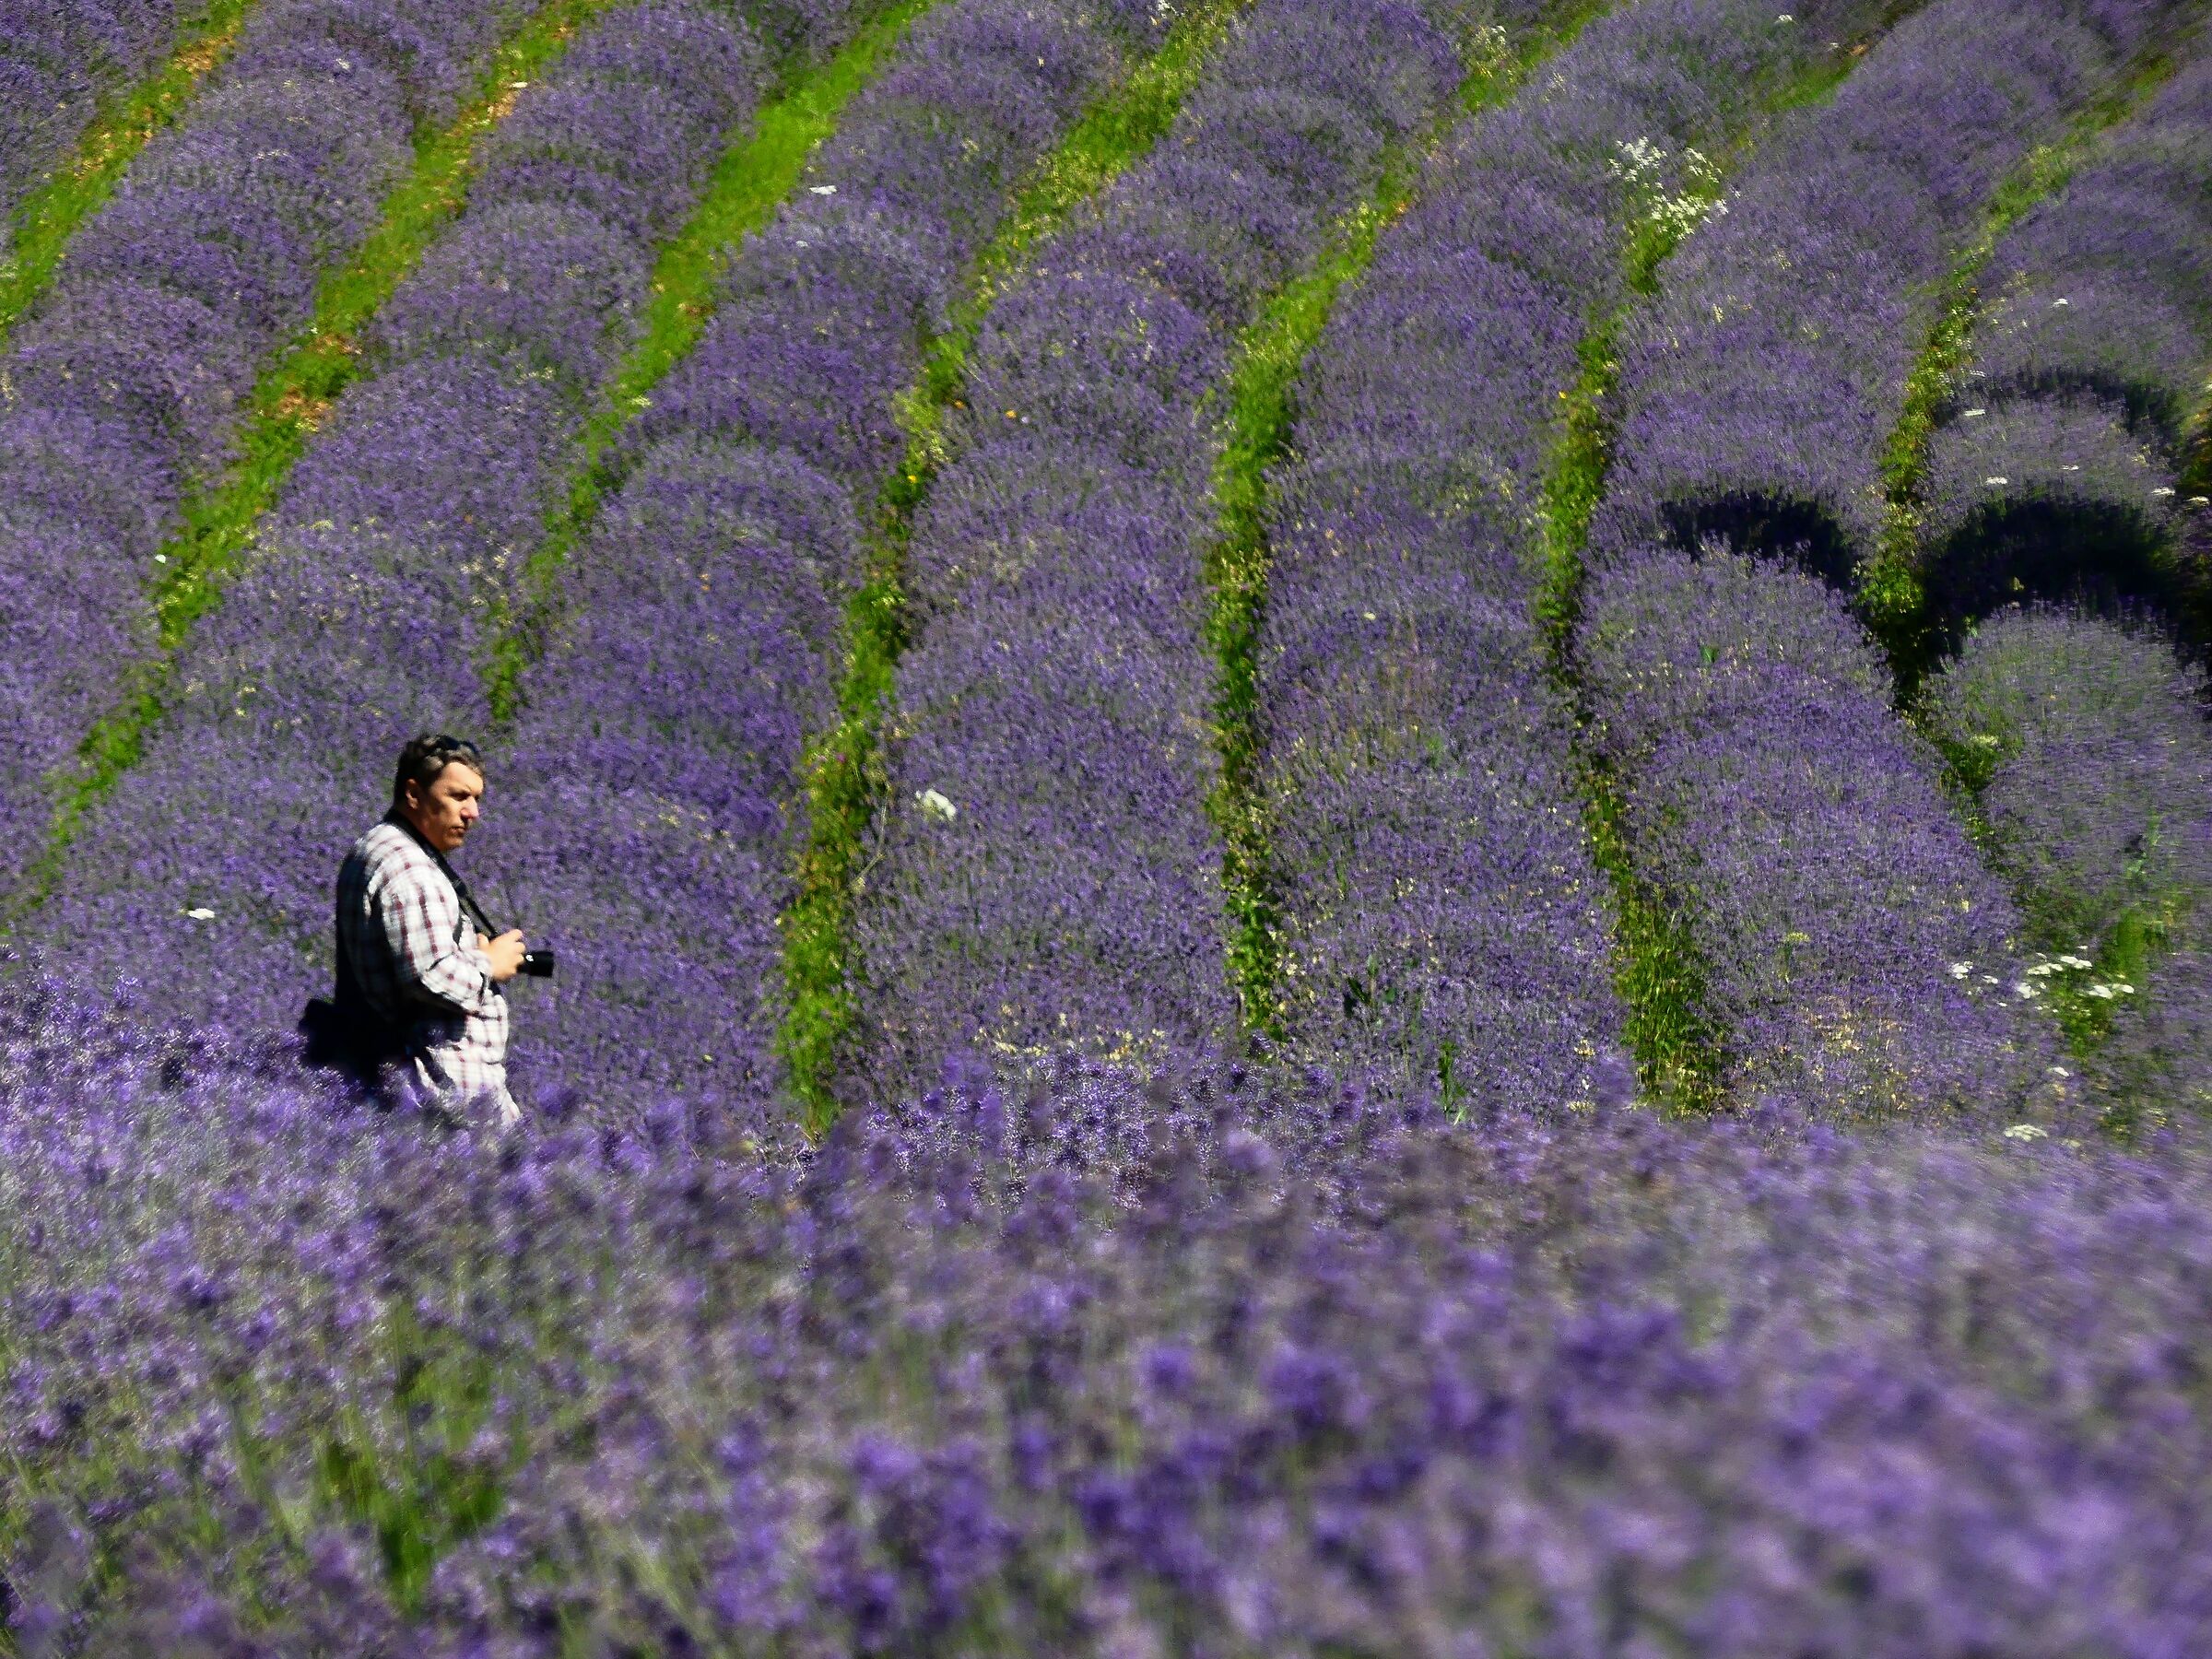 Between the rows of lavender...